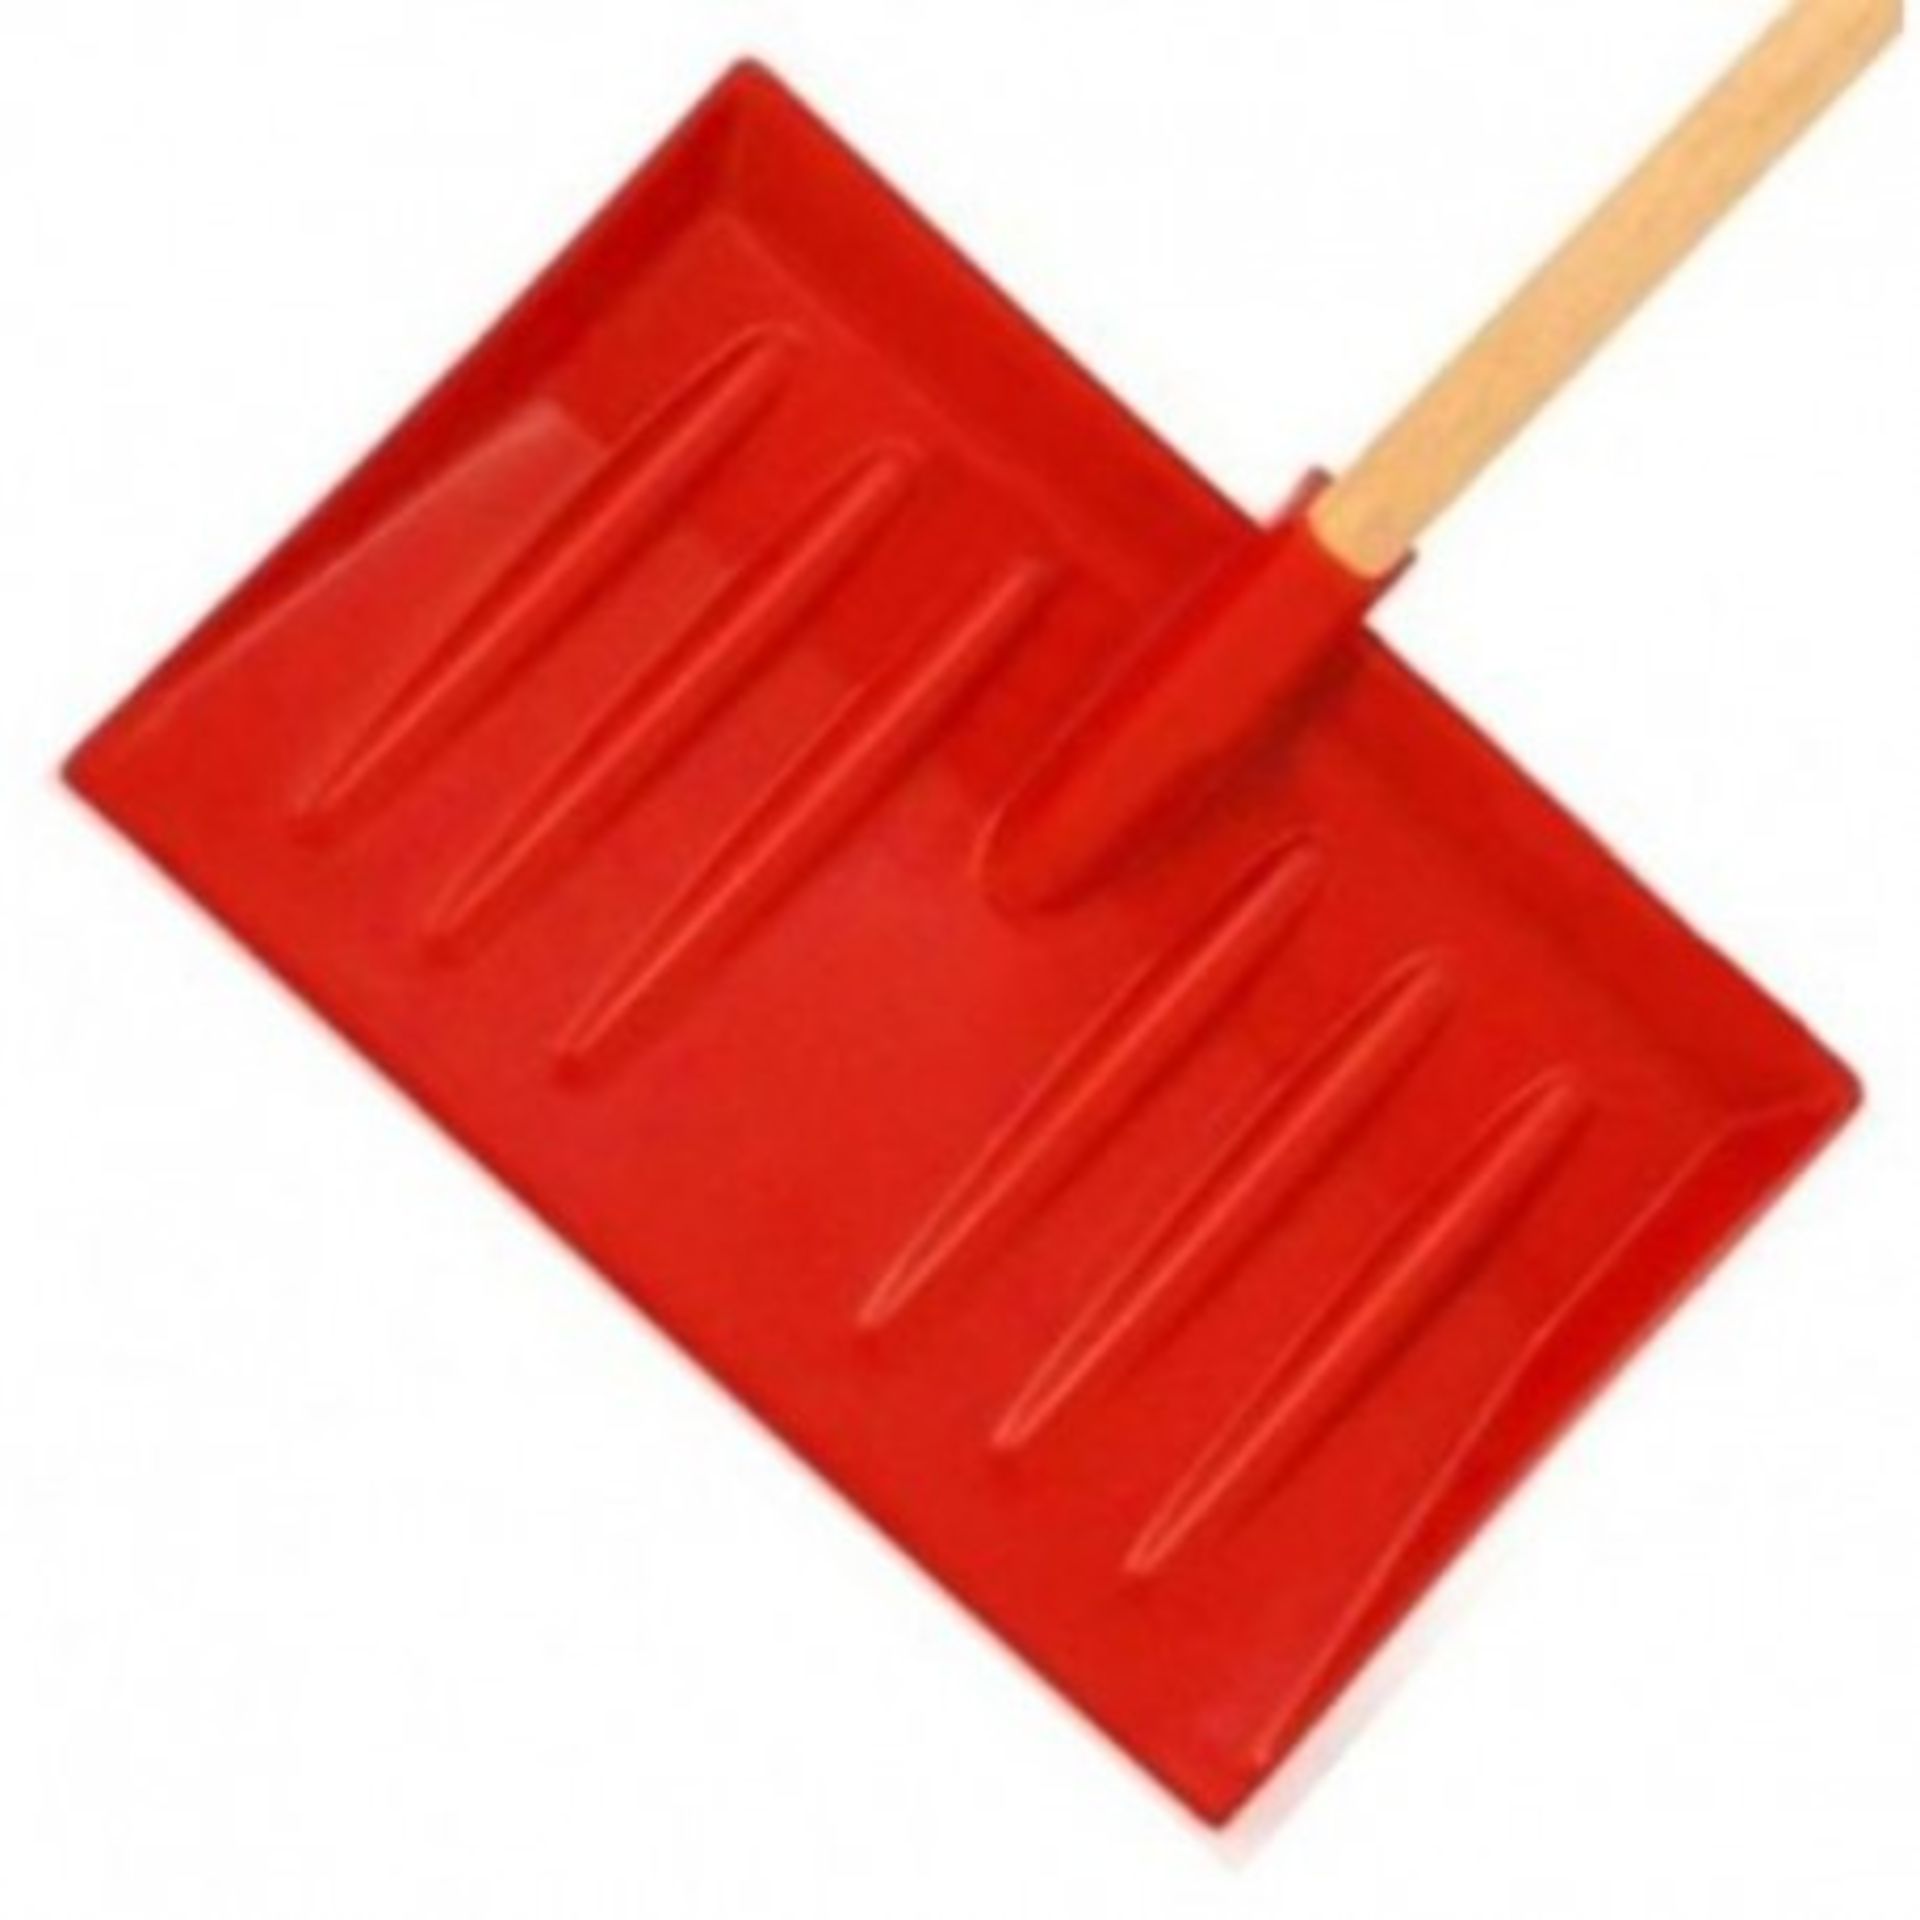 V Brand New Industrial Snow Shovel With Extra Wide Head & Wooden Handle / Sit NOTE: Item is